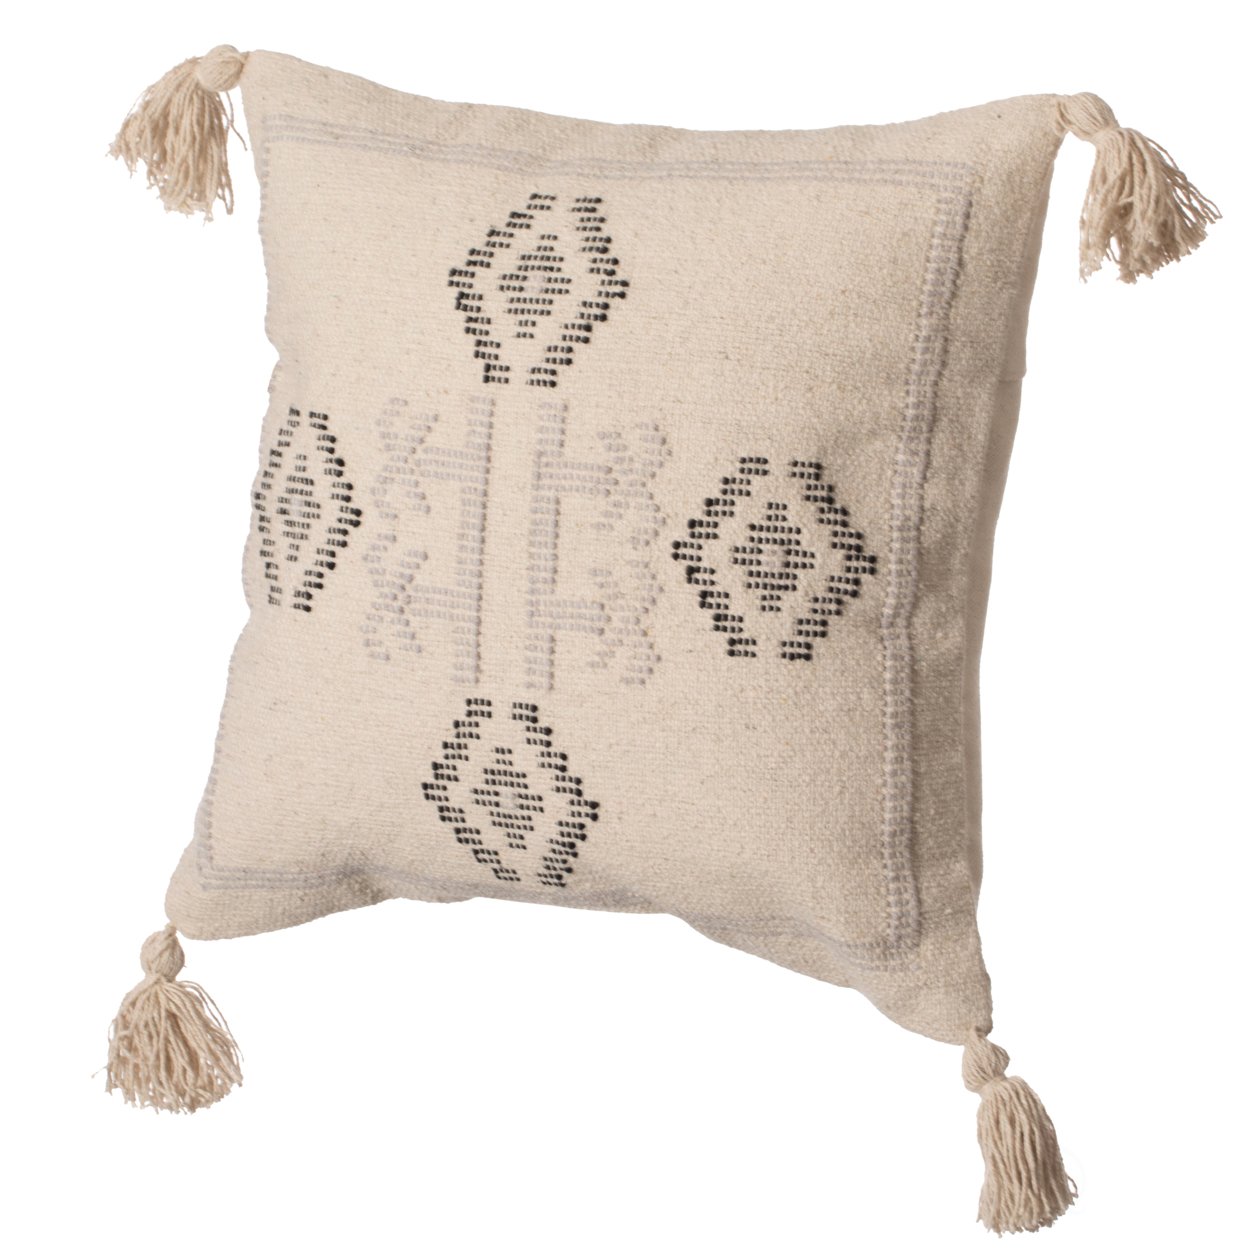 16 Handwoven Cotton Throw Pillow Cover With Tribal Aztec Design And Tassel Corners - Green